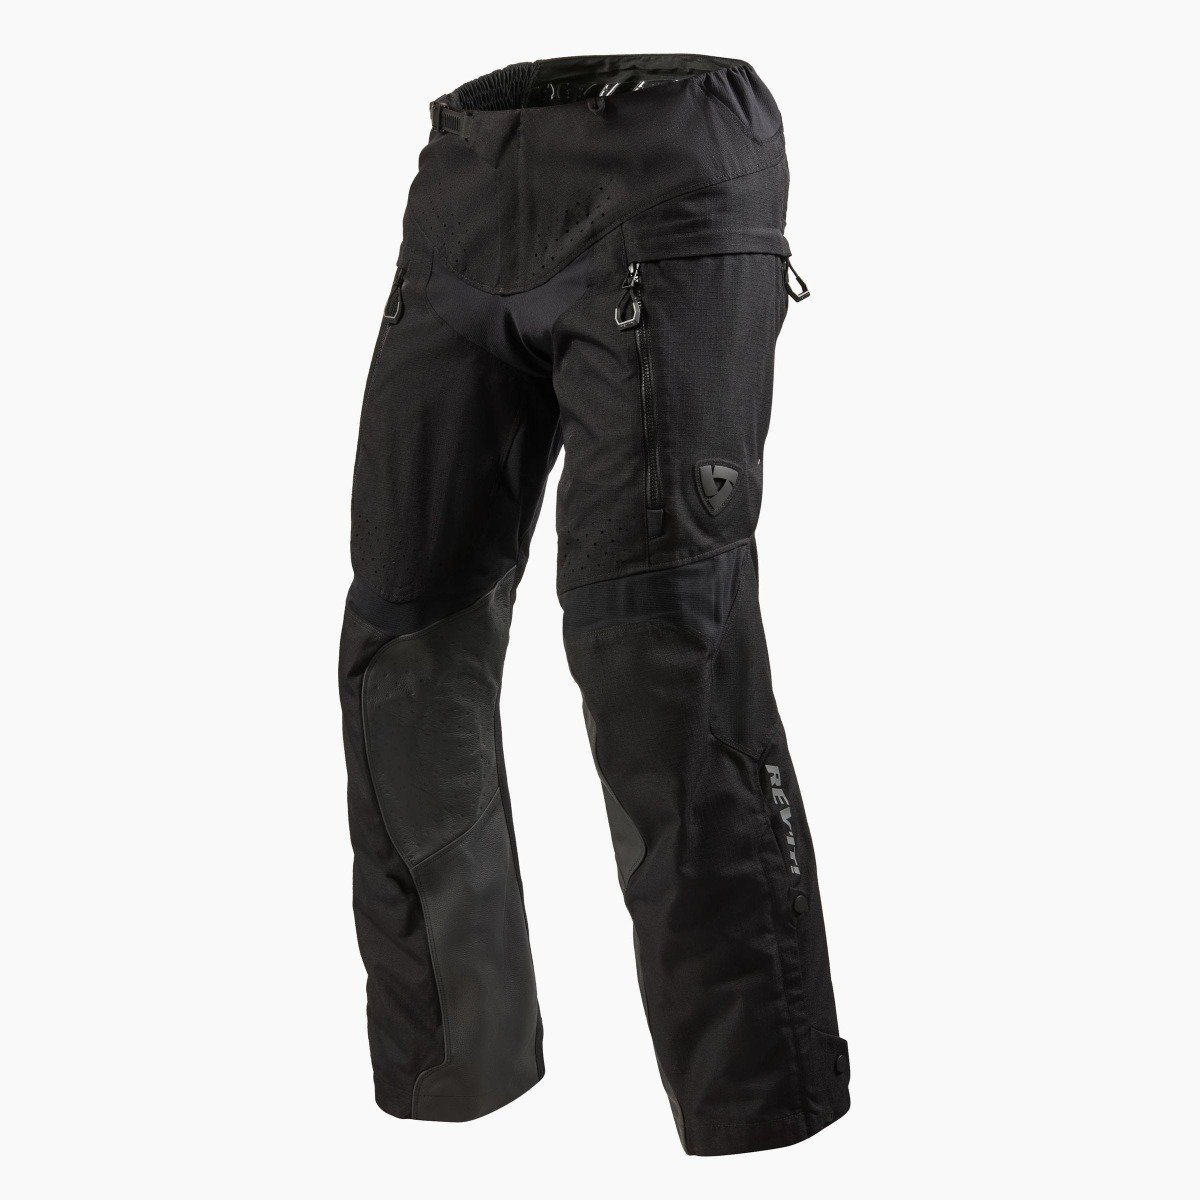 Image of REV'IT! Continent Black Motorcycle Pants Size XL ID 8700001297059